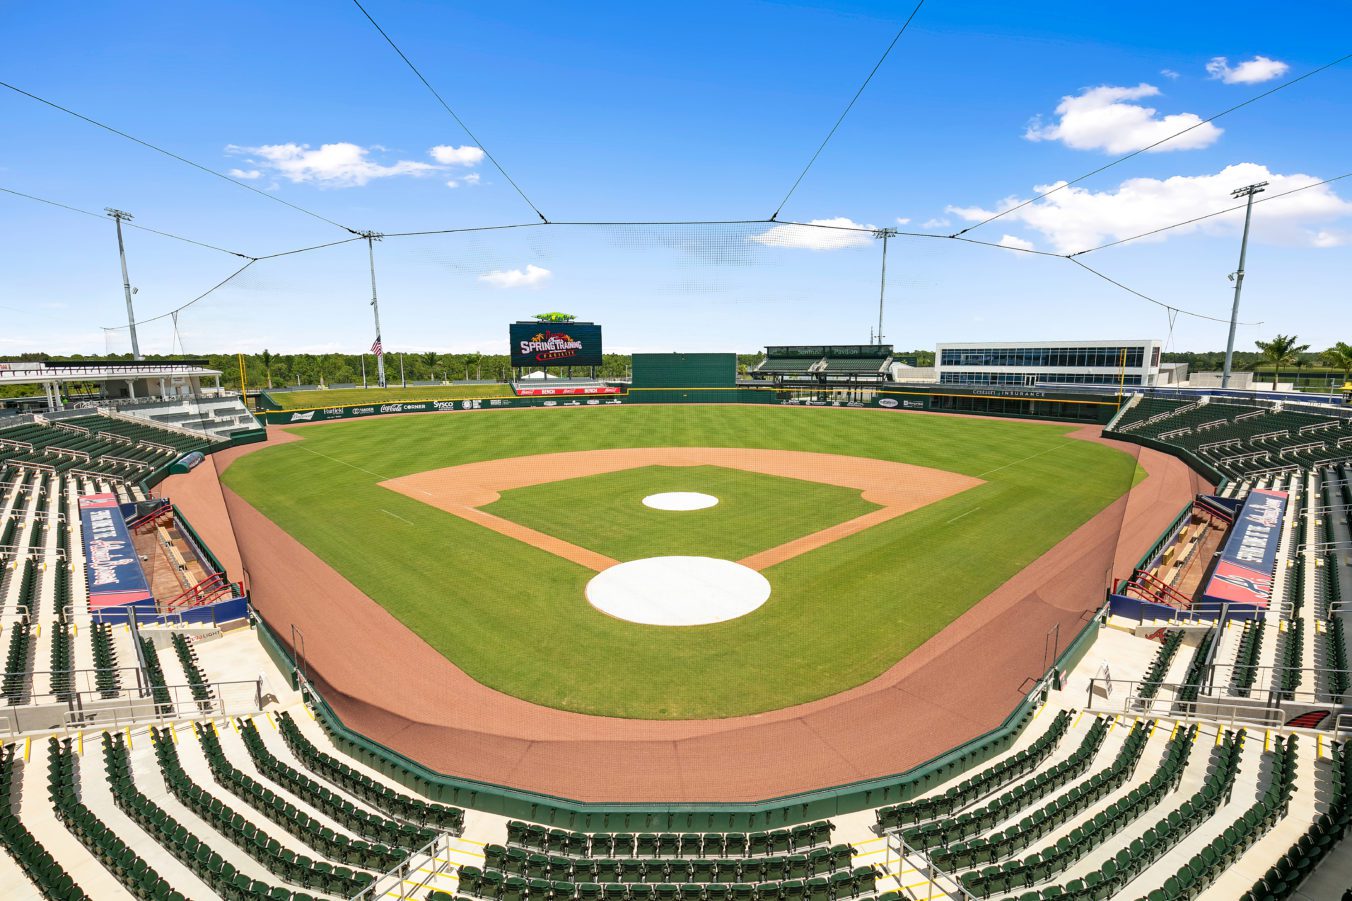 A view of the Atlanta Braves Spring Training stadium from behind home plate